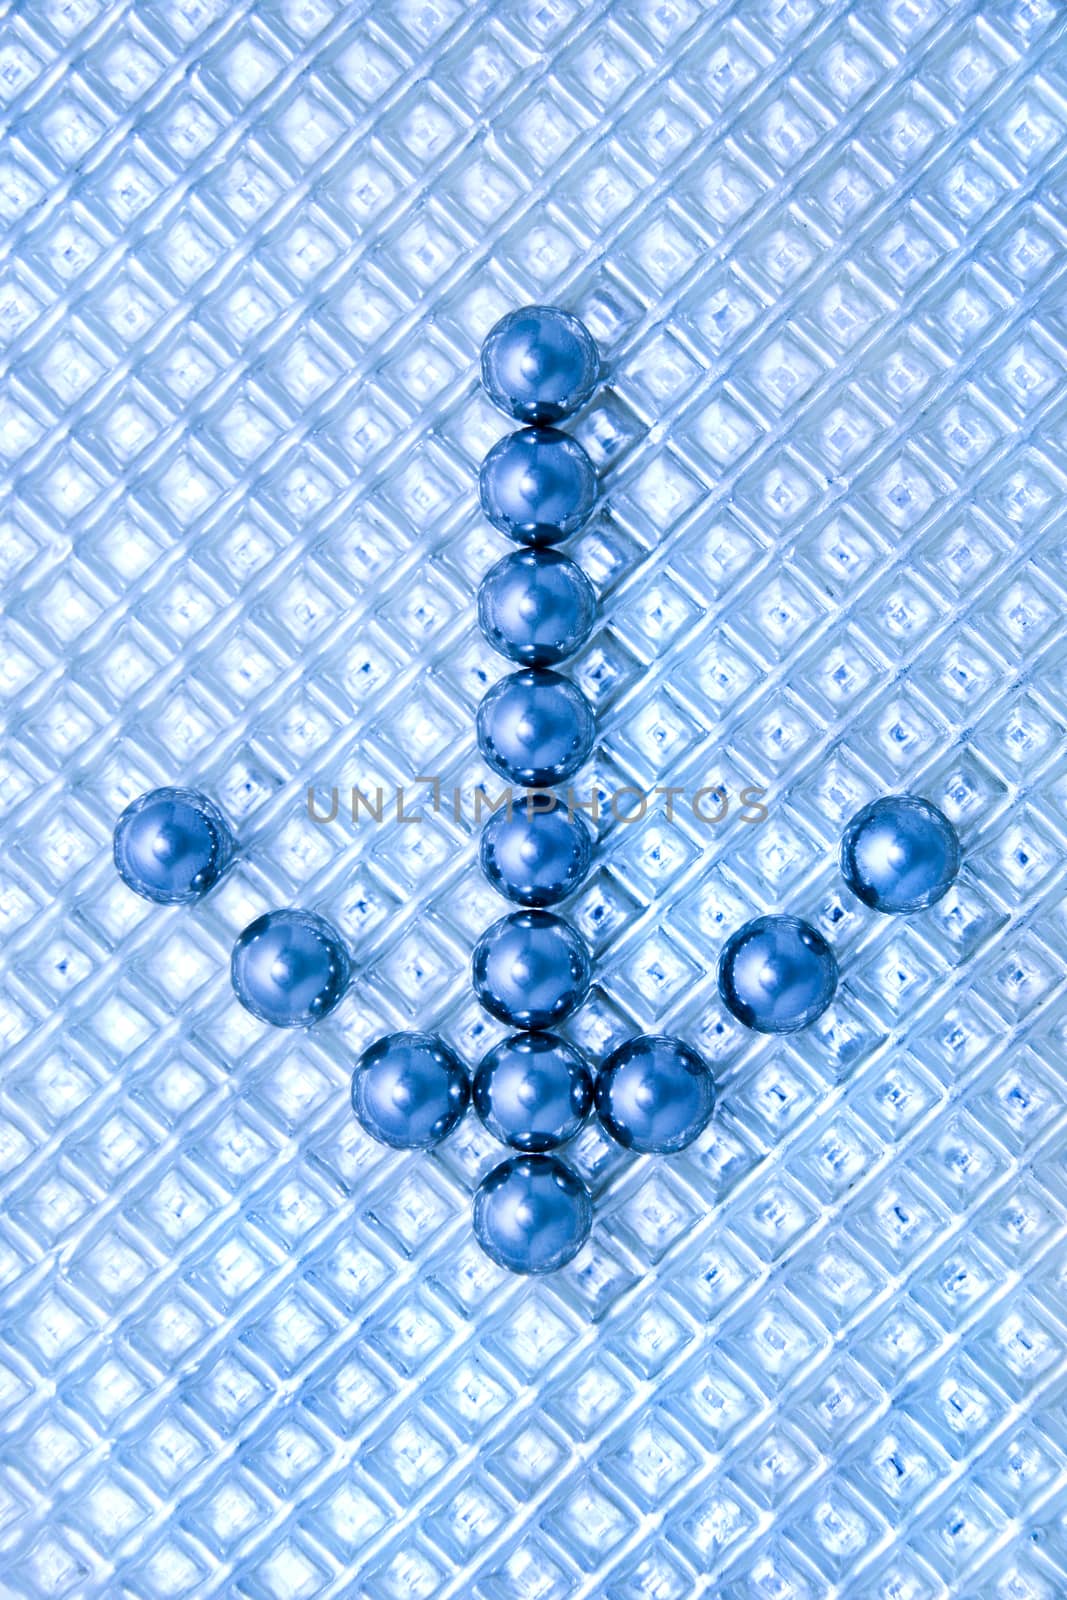 Arrow from steel balls on a plastic textural background